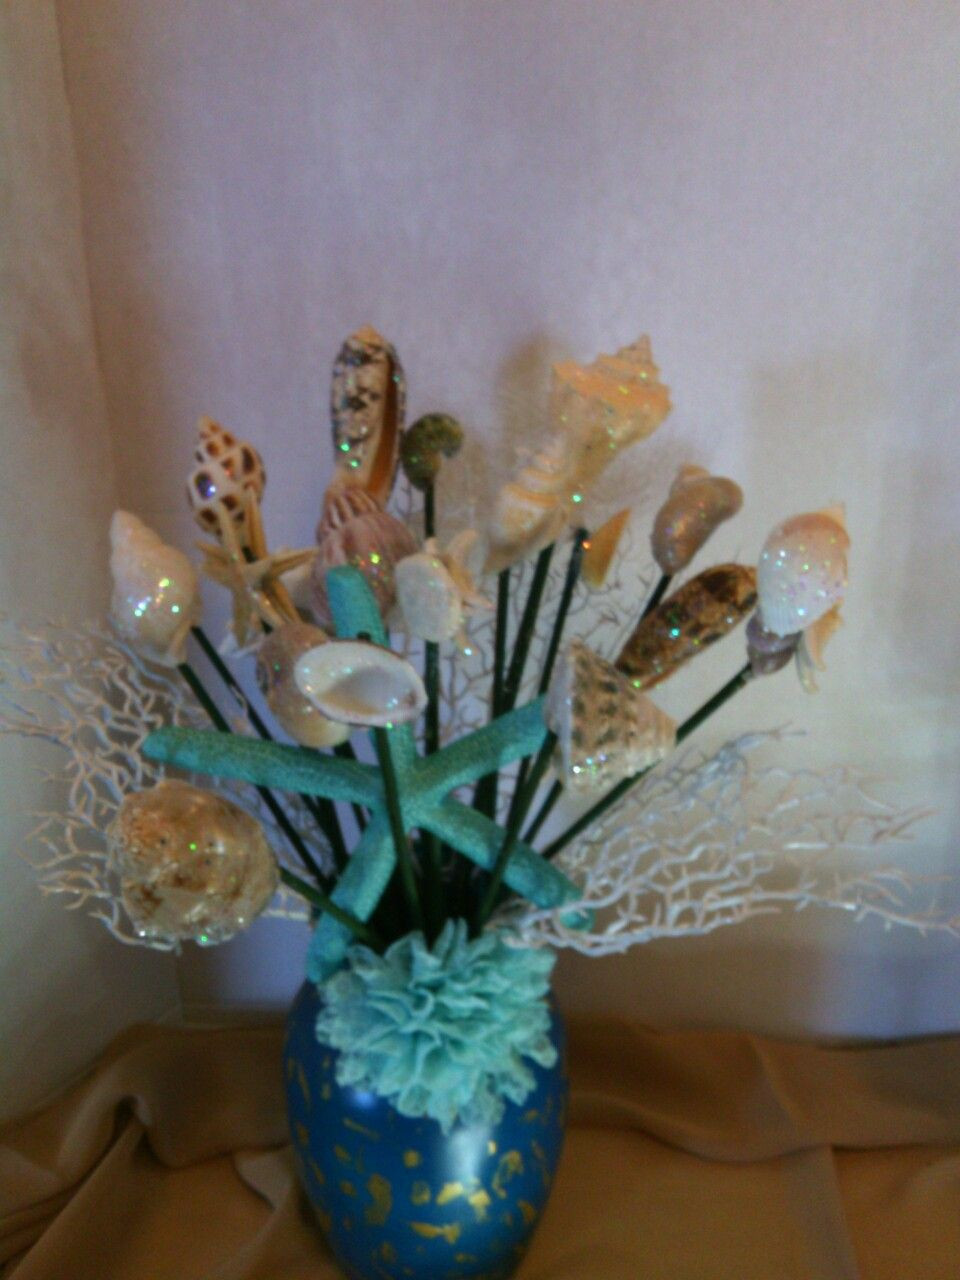 21 Stylish Dollar Store Vases 2024 free download dollar store vases of seashell bouquet vase from dollar store painted using alcohol ink with regard to seashell bouquet vase from dollar store painted using alcohol ink glue seashells on flo